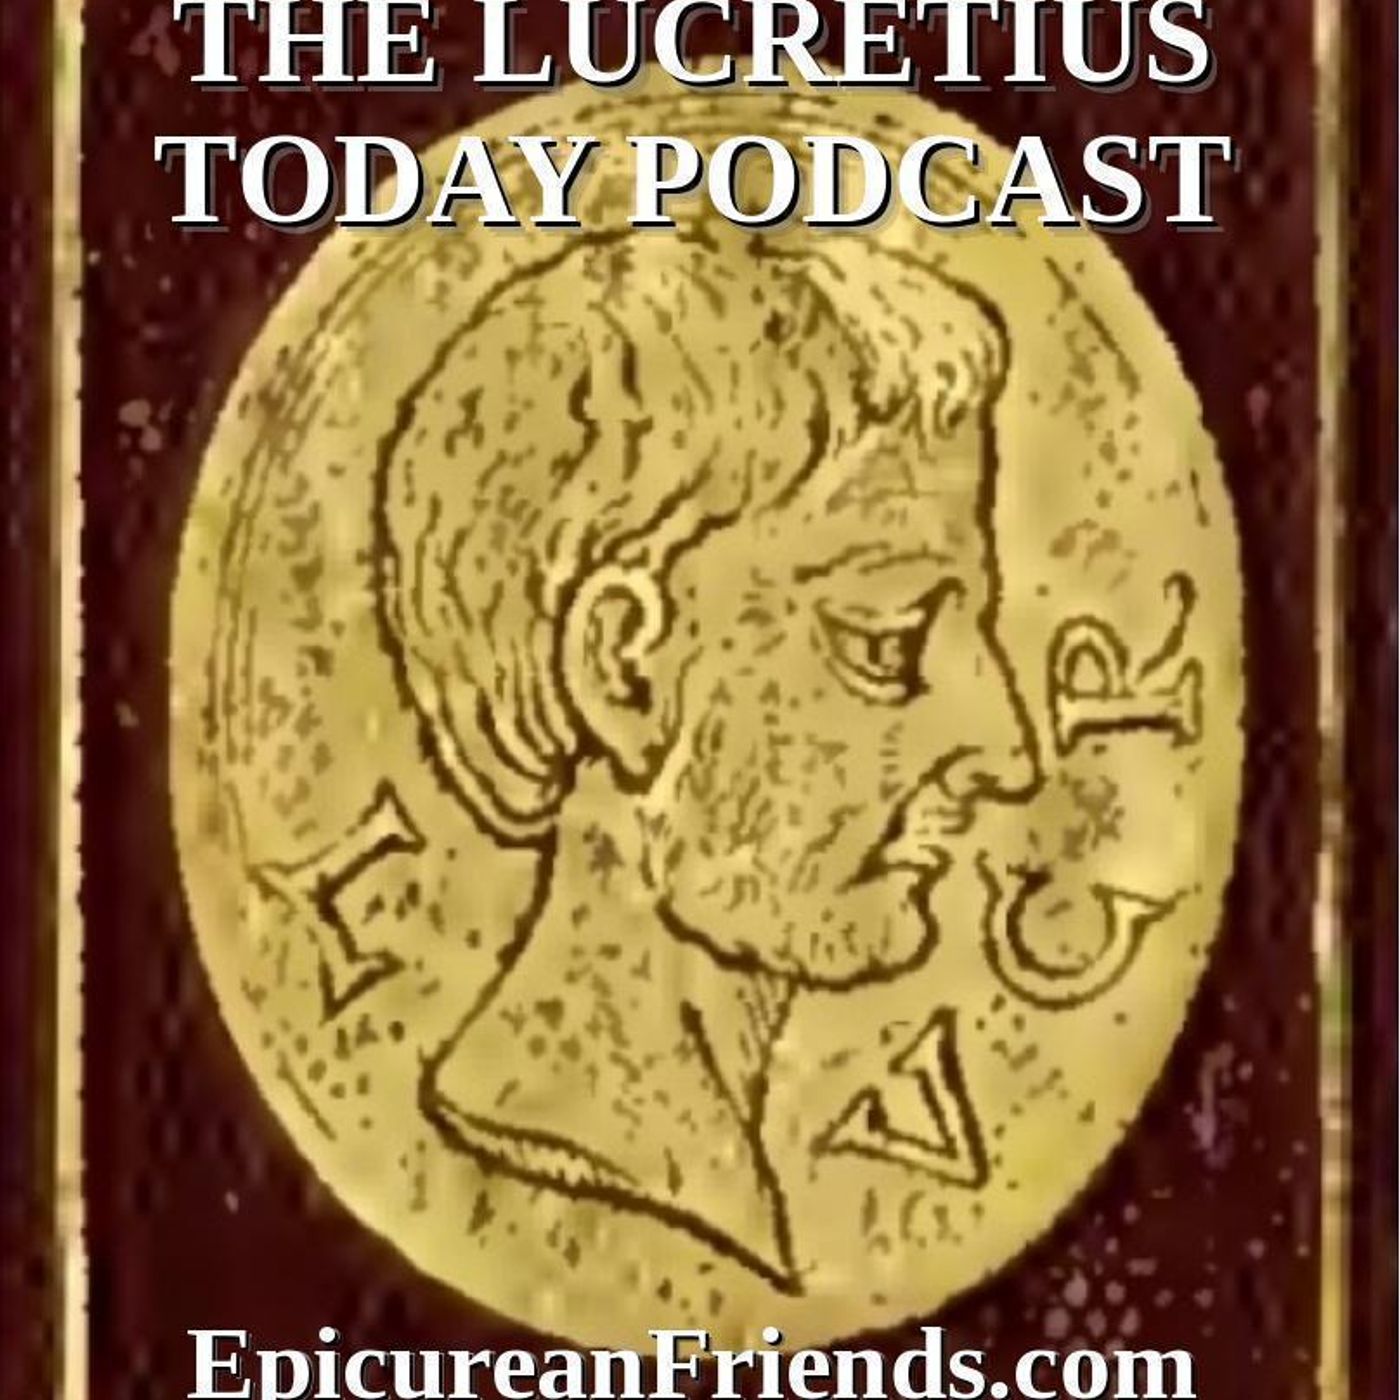 Episode 220 - Cicero’s On Ends - Book Two - Part 27 -Cicero Attacks Epicurus’ End-Of-Life Decisionmaking